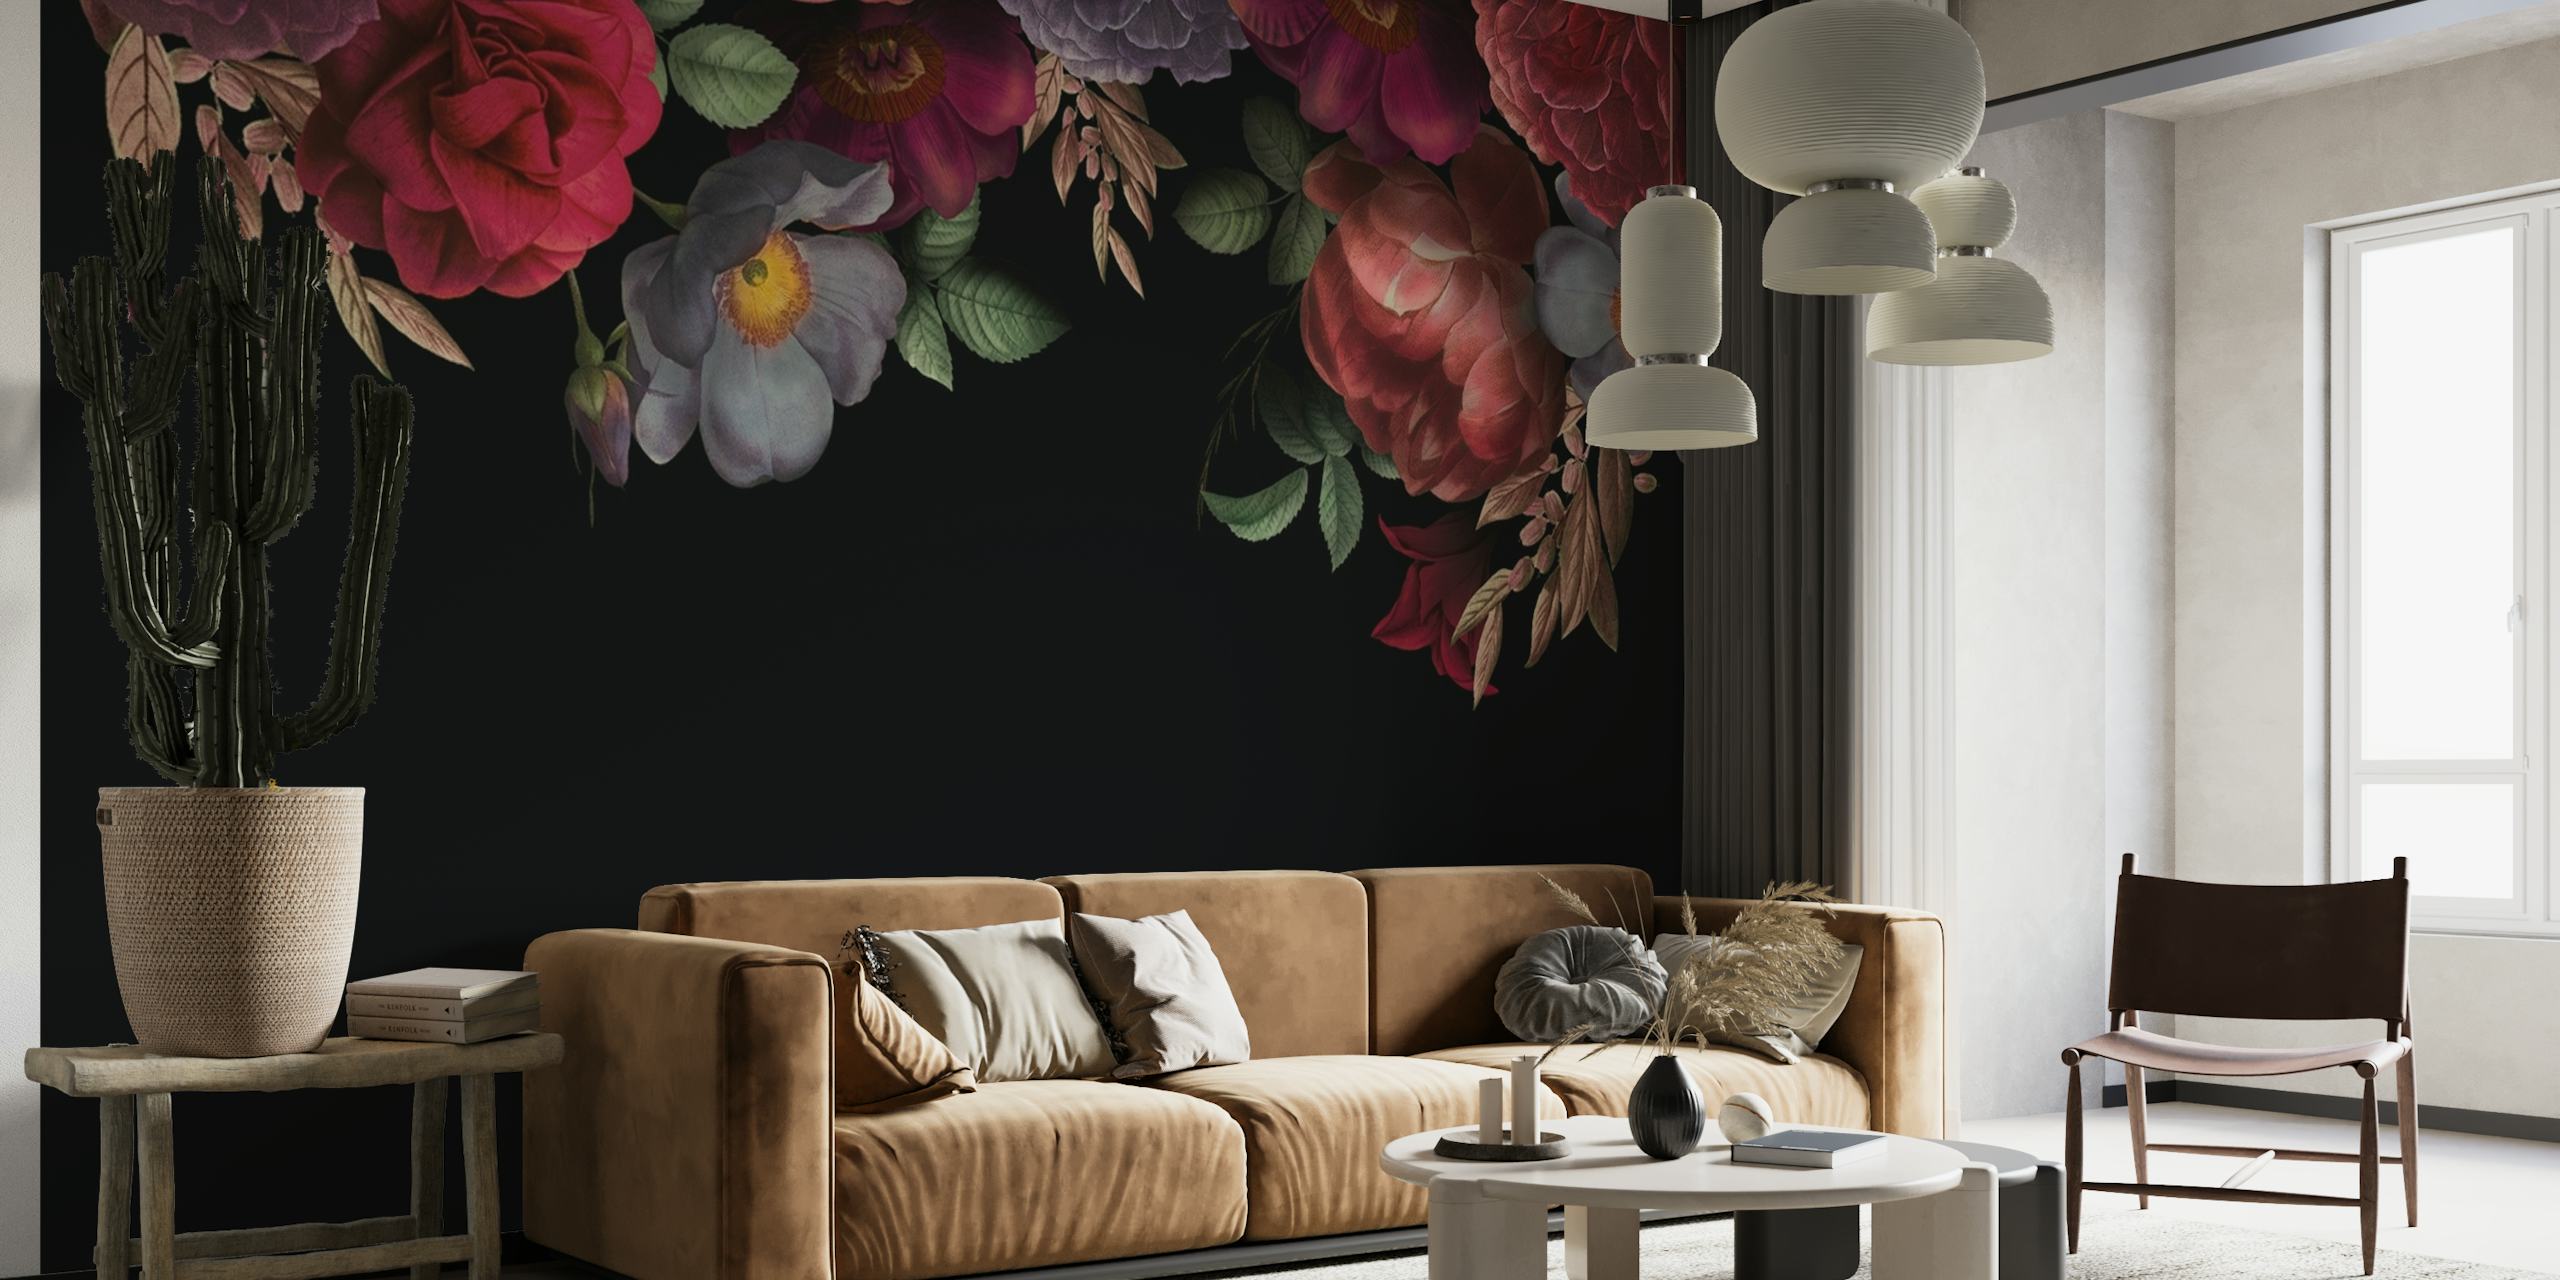 Baroque style rose pattern on a dark background wall mural